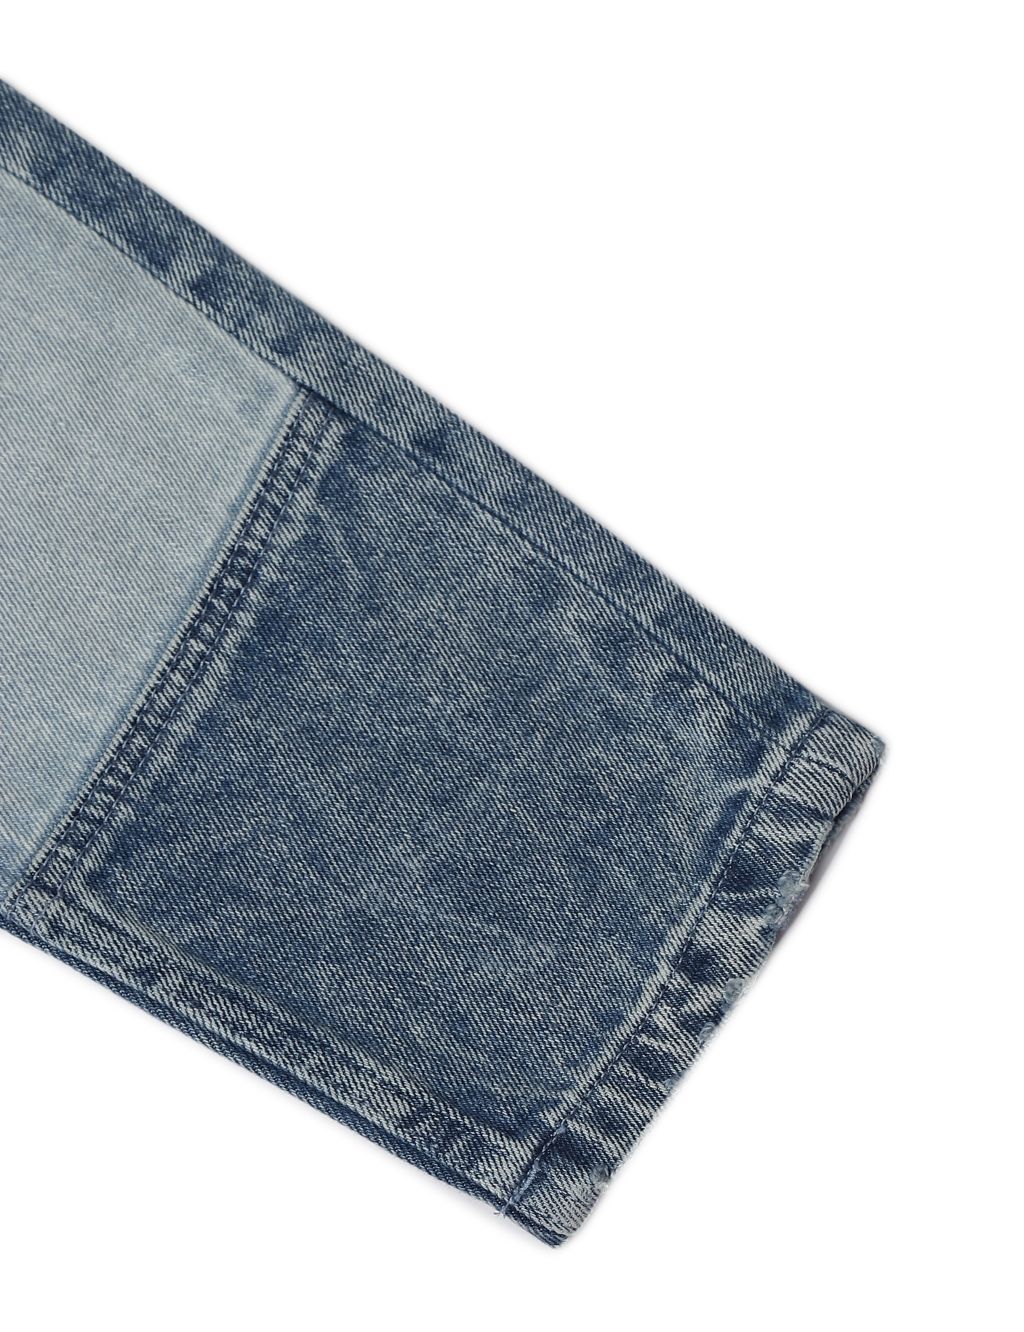 Relaxed Patchwork Denim Jean (6-16 Yrs) image 4